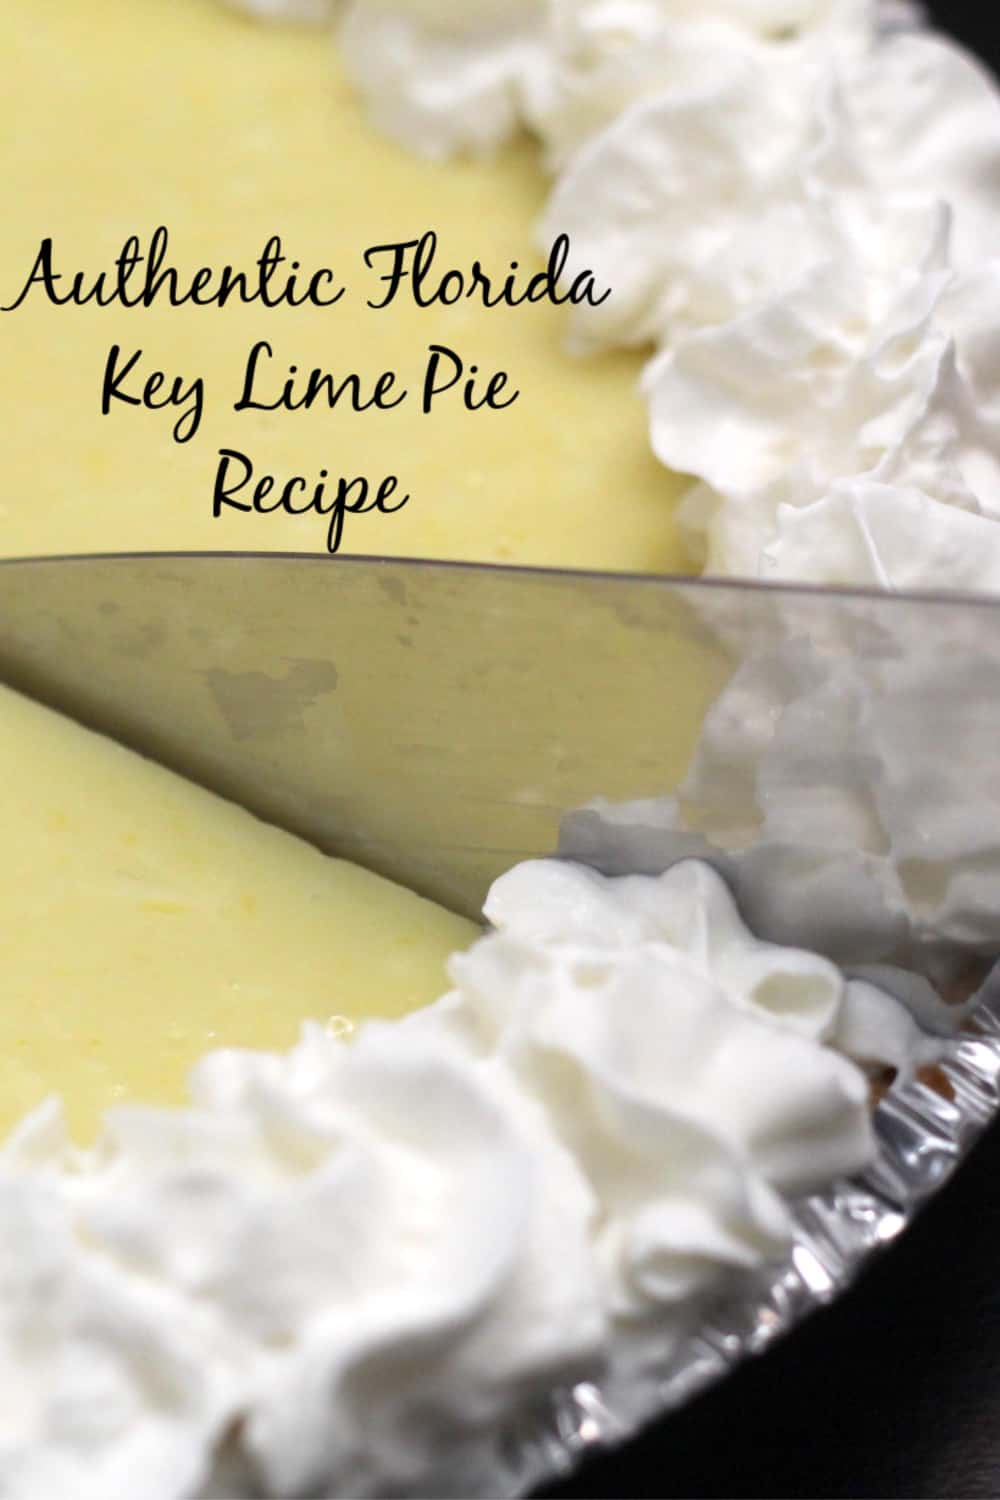 Authentic key lime pie recipe! This easy key lime pie recipe is sure to be the perfect easy dessert for your next dessert party or family get together. Bring a taste of Florida to the table with this delicious dessert!